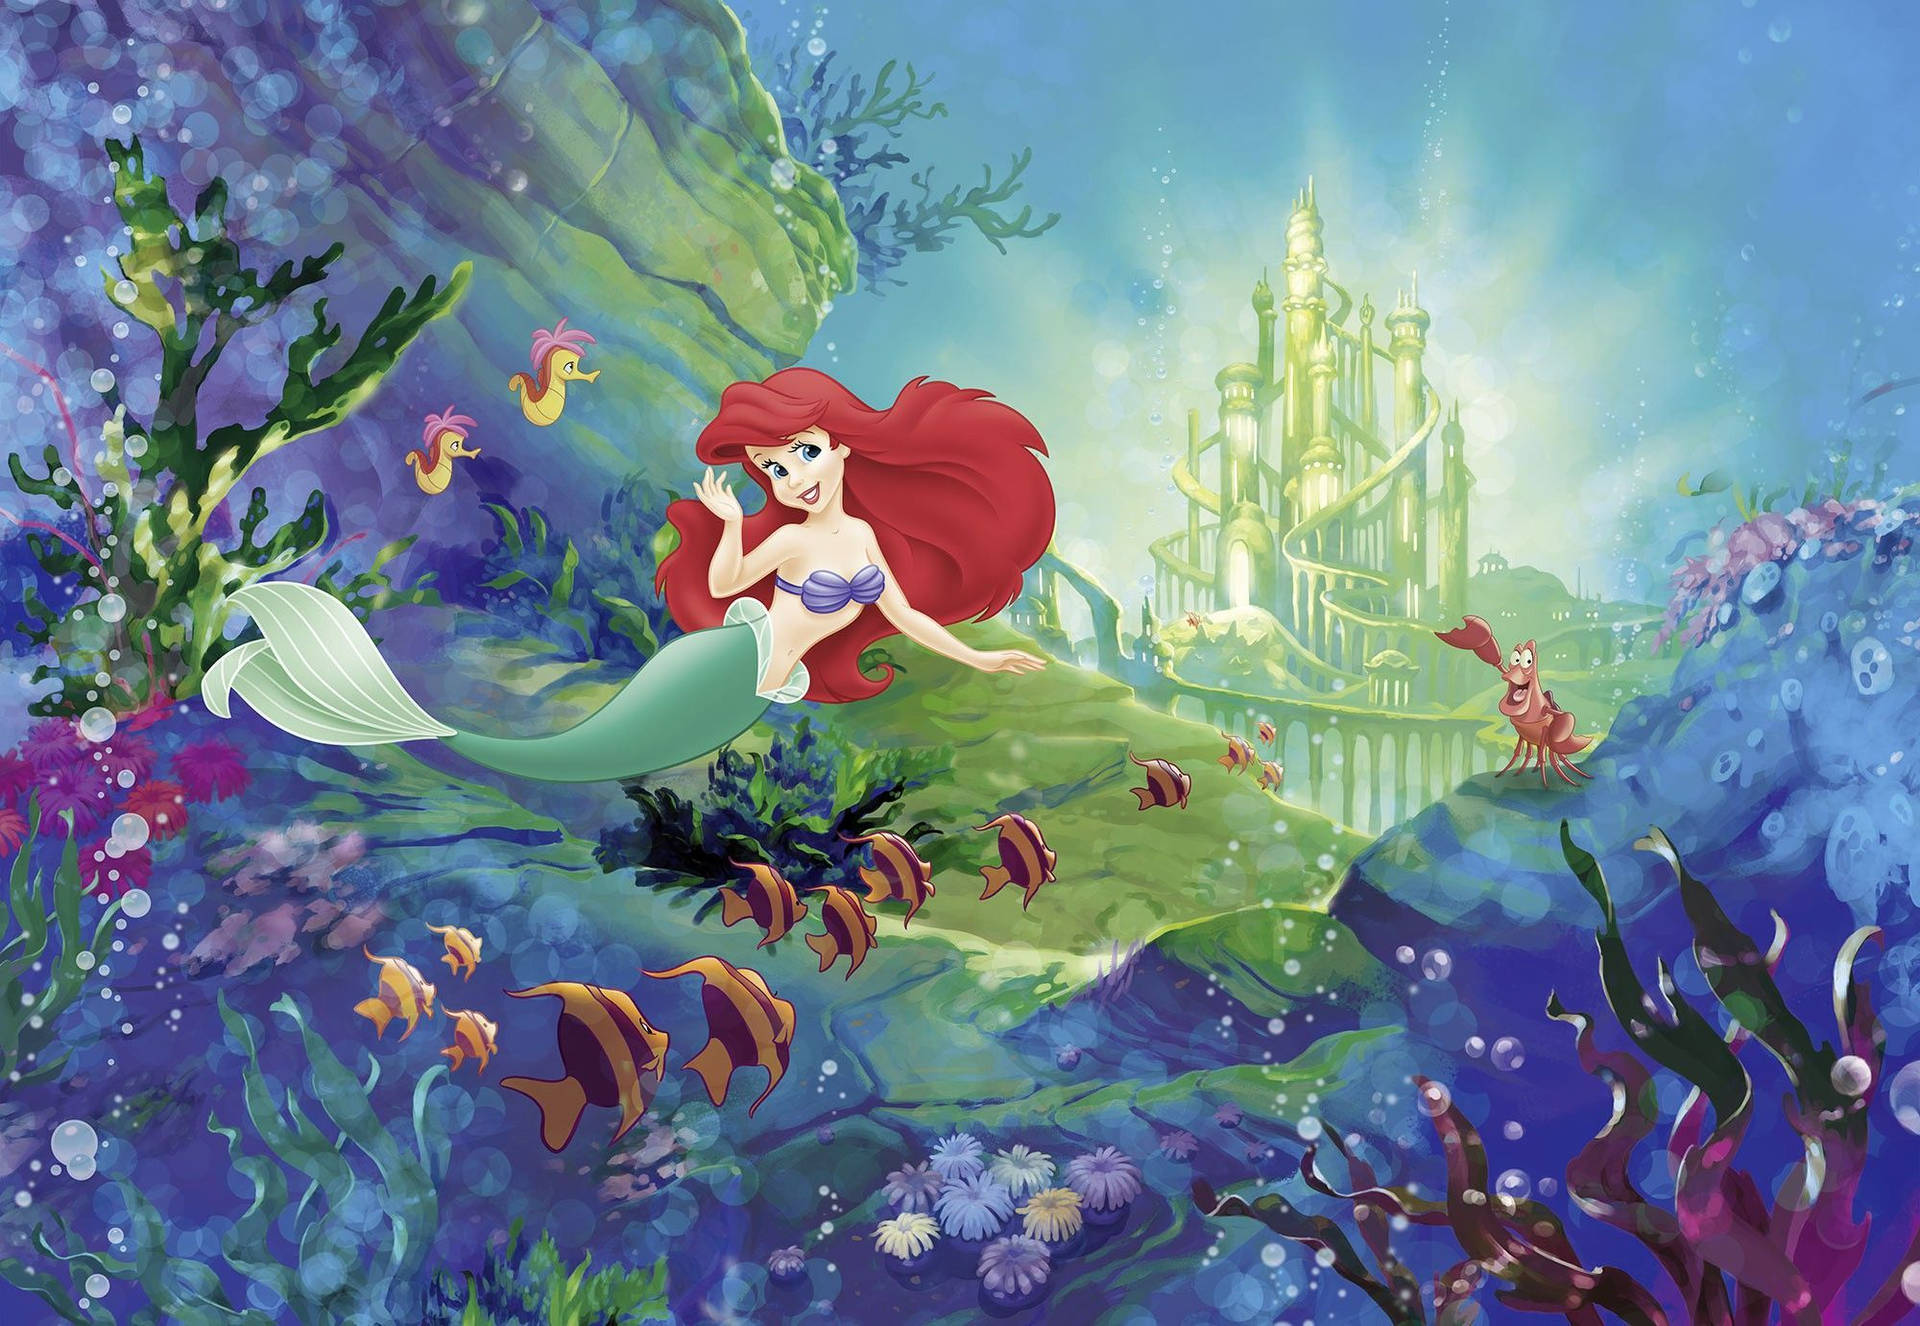 [100+] The Little Mermaid Pictures for FREE